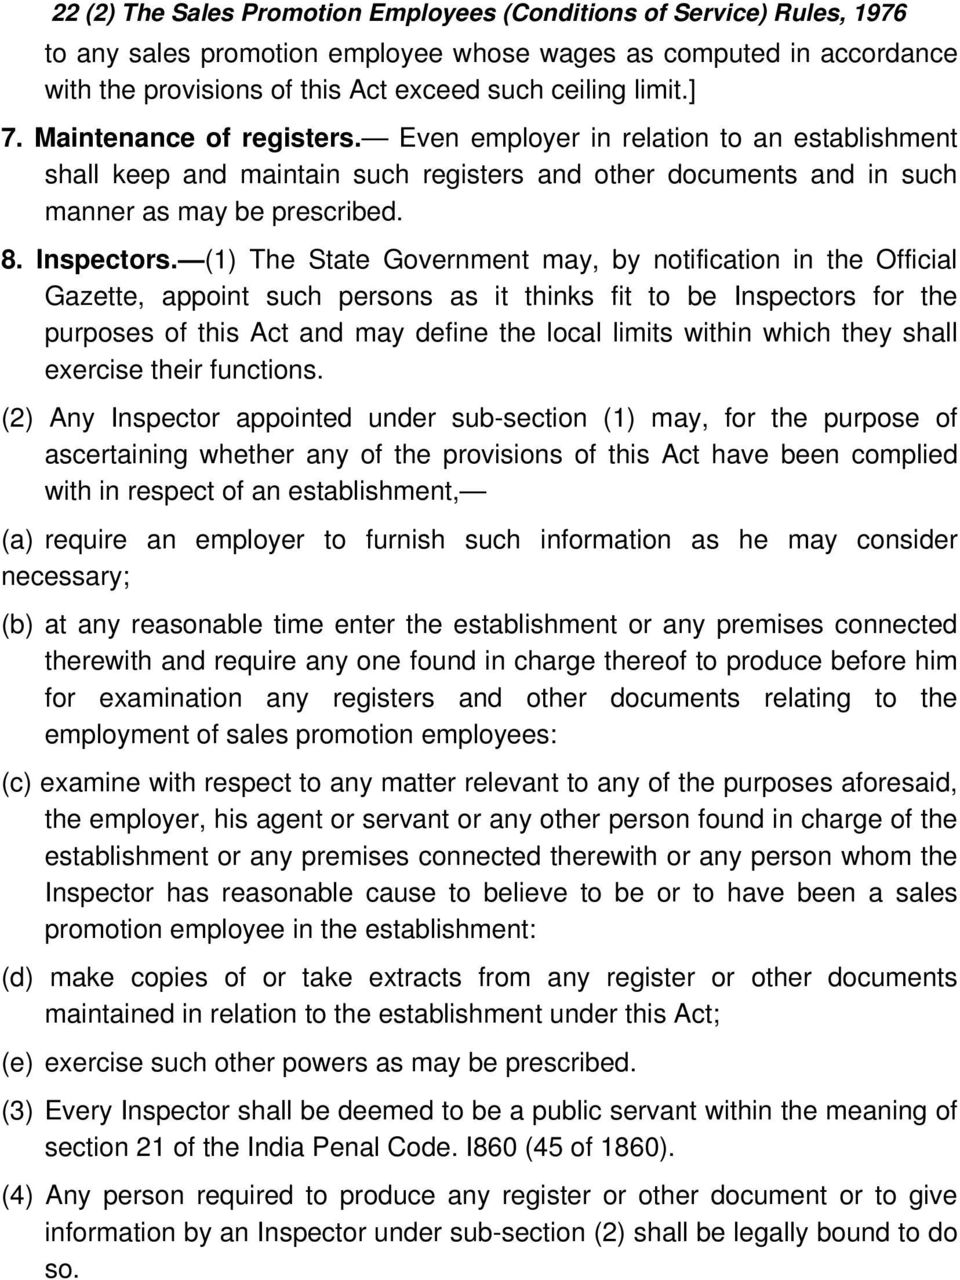 (1) The State Government may, by notification in the Official Gazette, appoint such persons as it thinks fit to be Inspectors for the purposes of this Act and may define the local limits within which